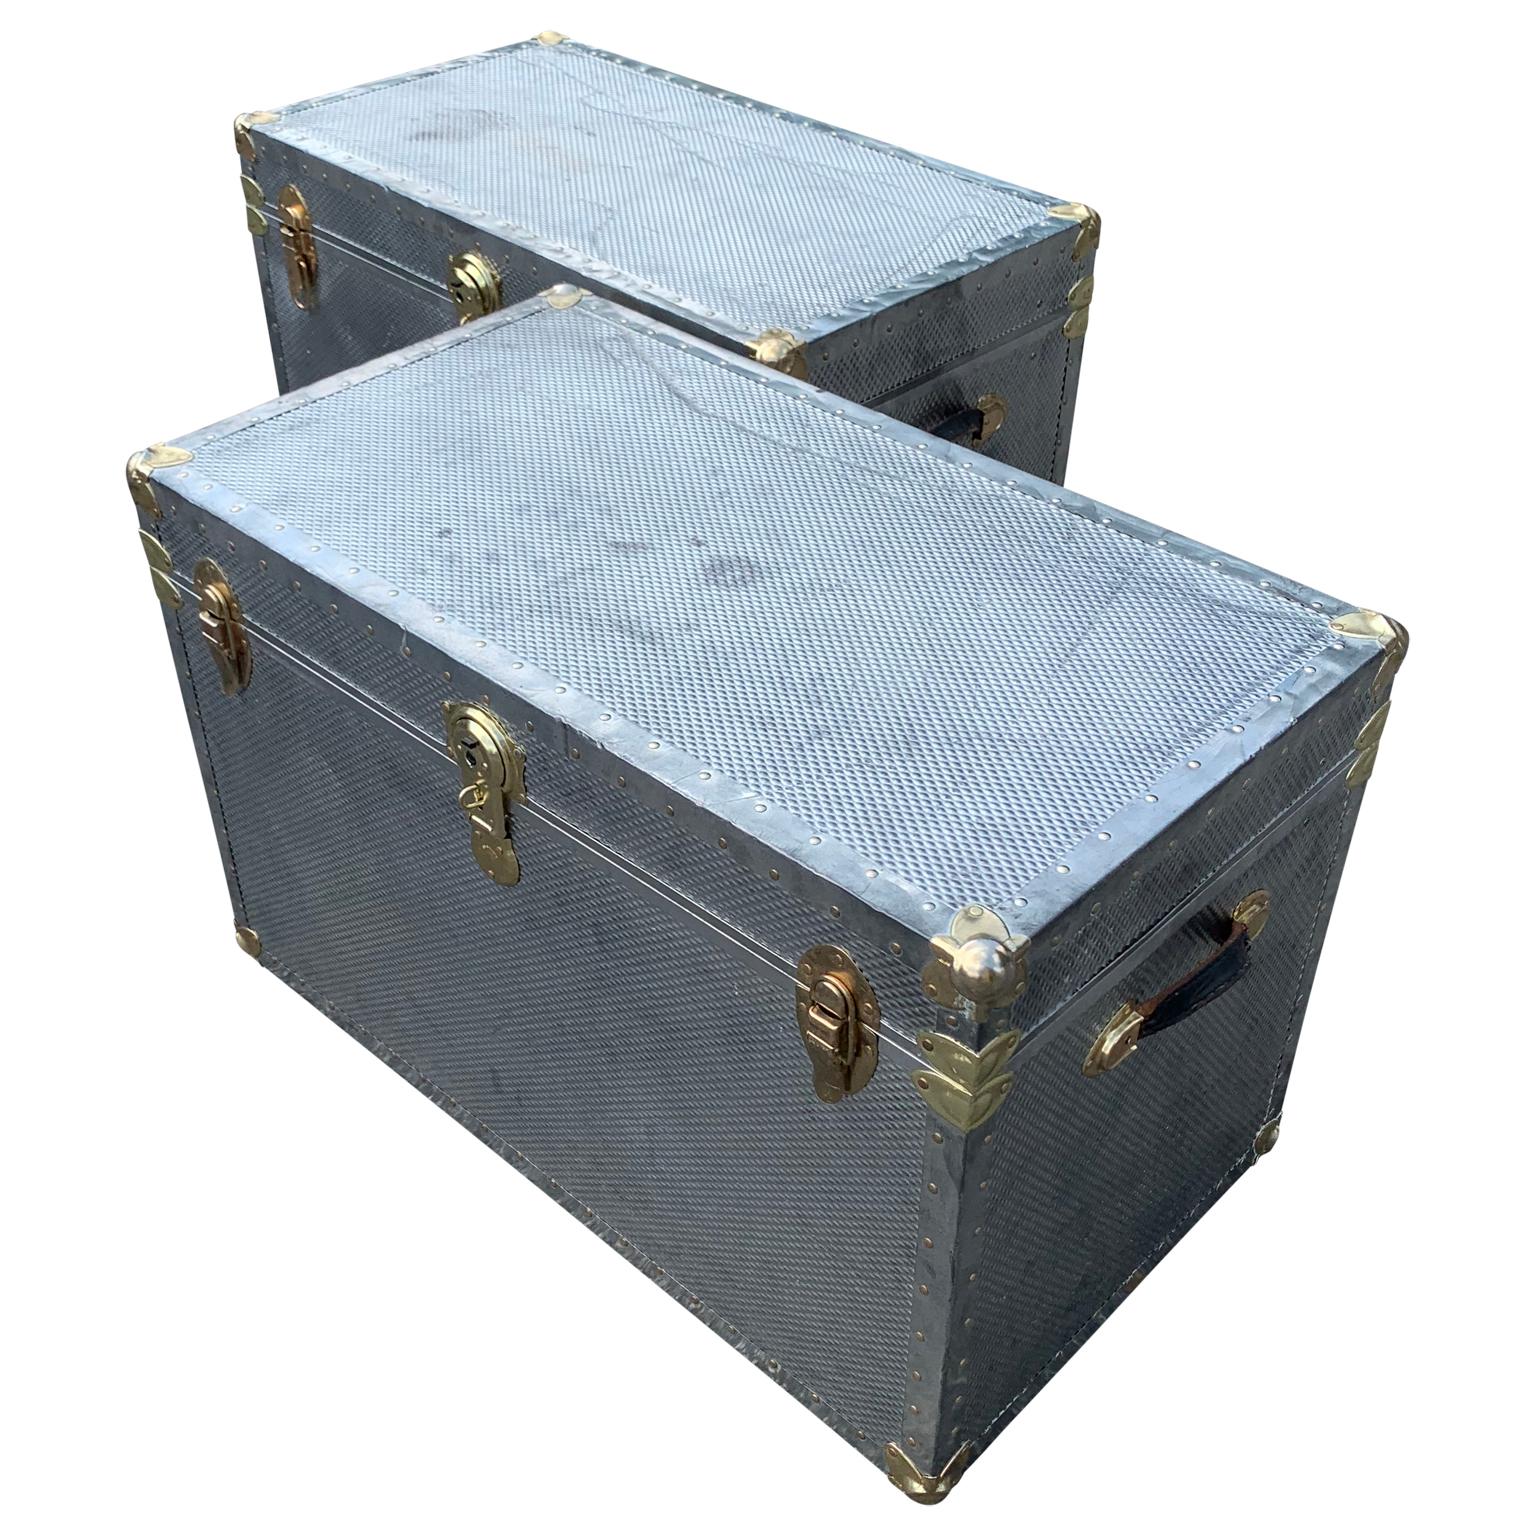 Two Polished Diamond Aluminum and Brass Streamer Trunks (Poliert)